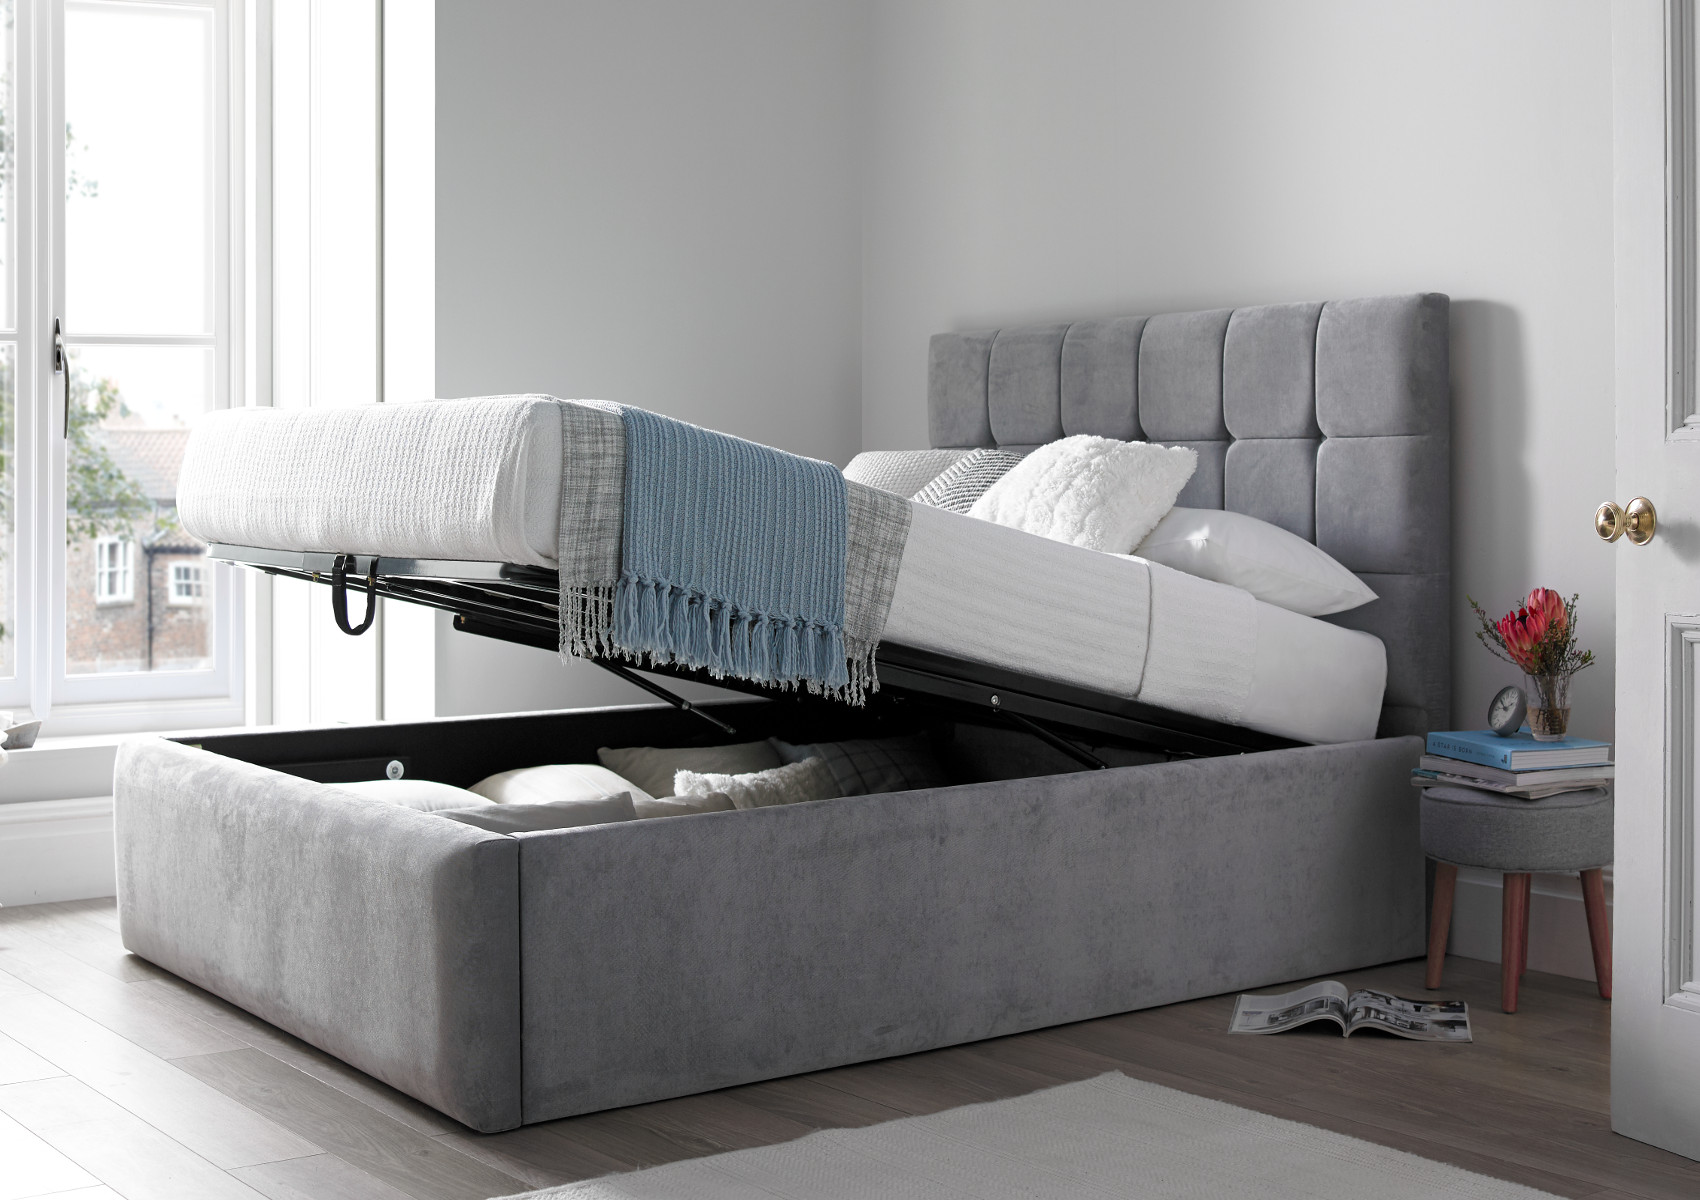 View Bromley Shetland Mercury Upholstered King Size Ottoman Bed Time4Sleep information